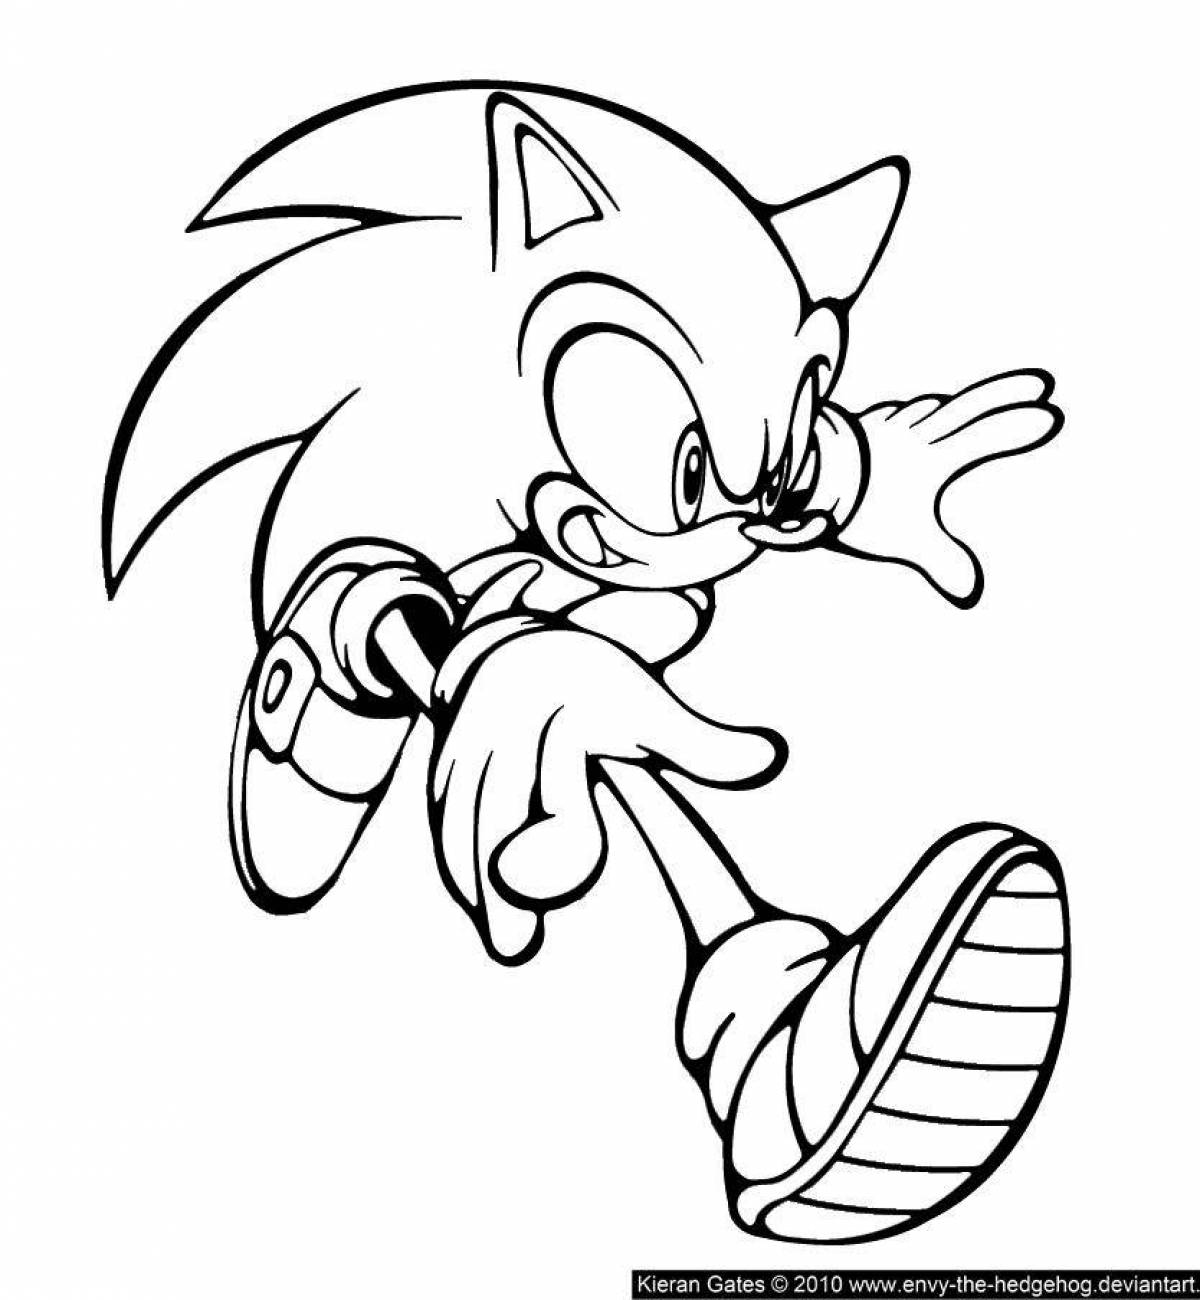 Energetic coloring sonic for boys